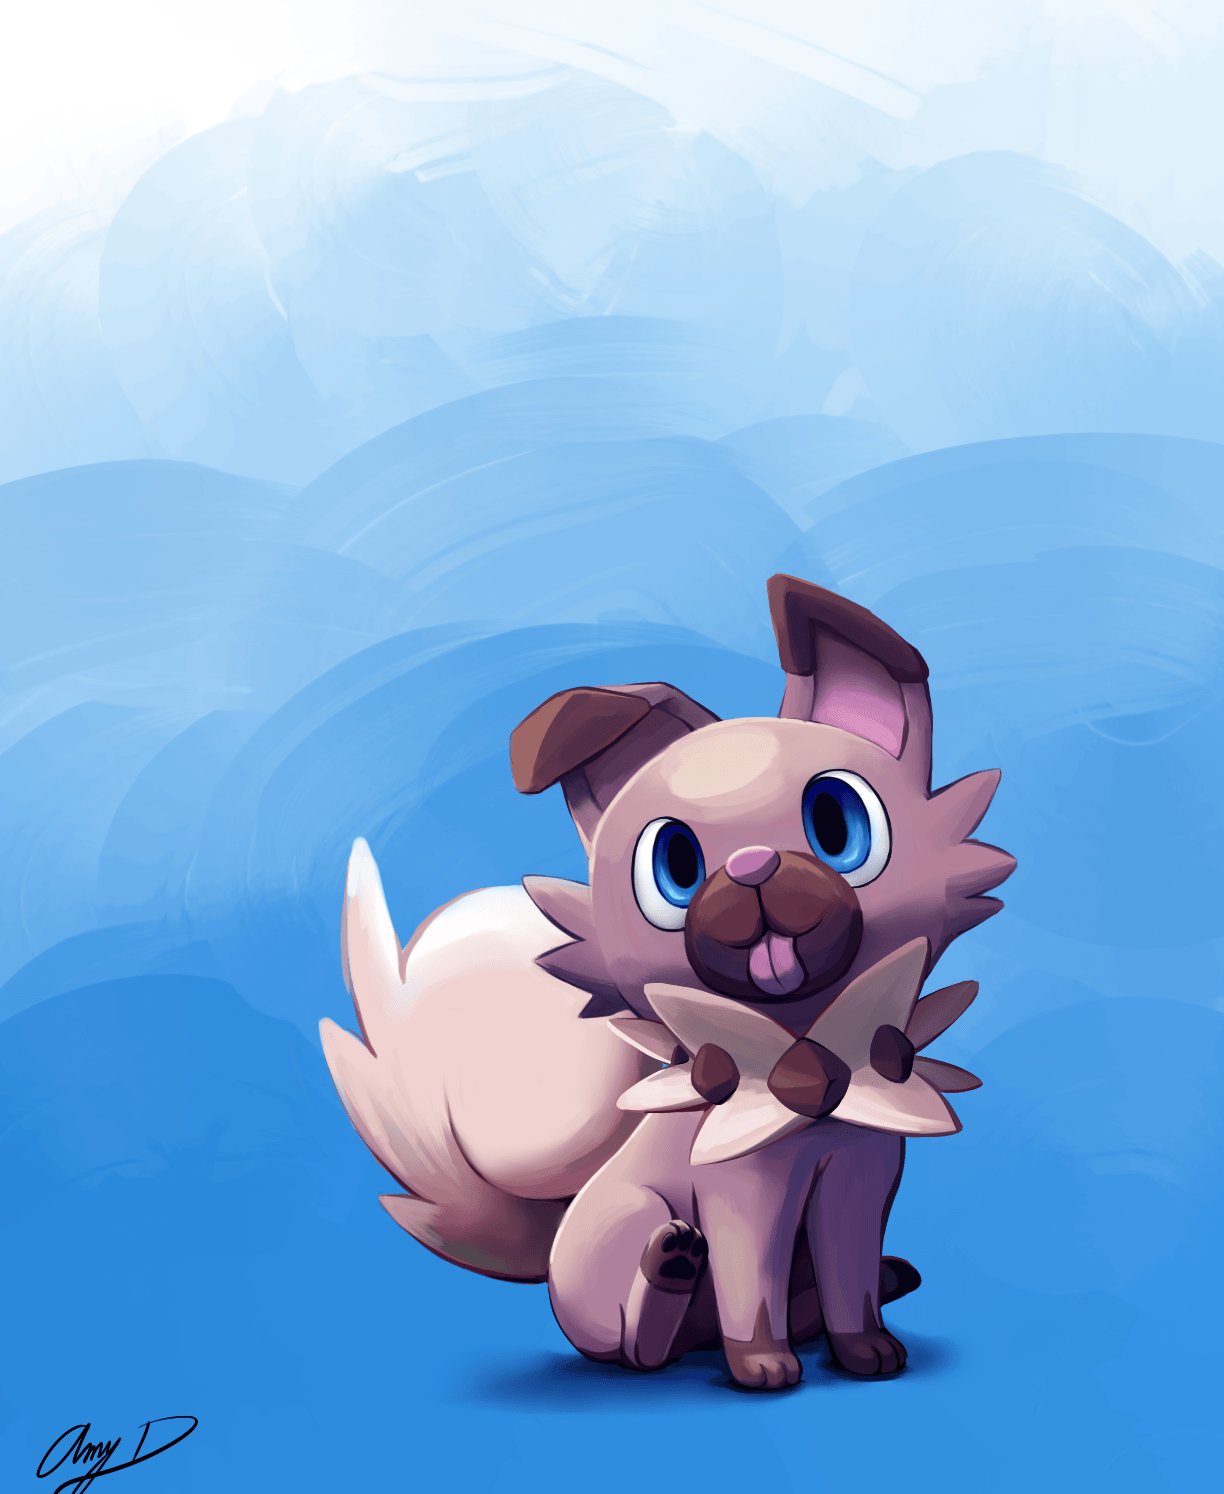 Rockruff the pin if you love super heroes too! Cause guess